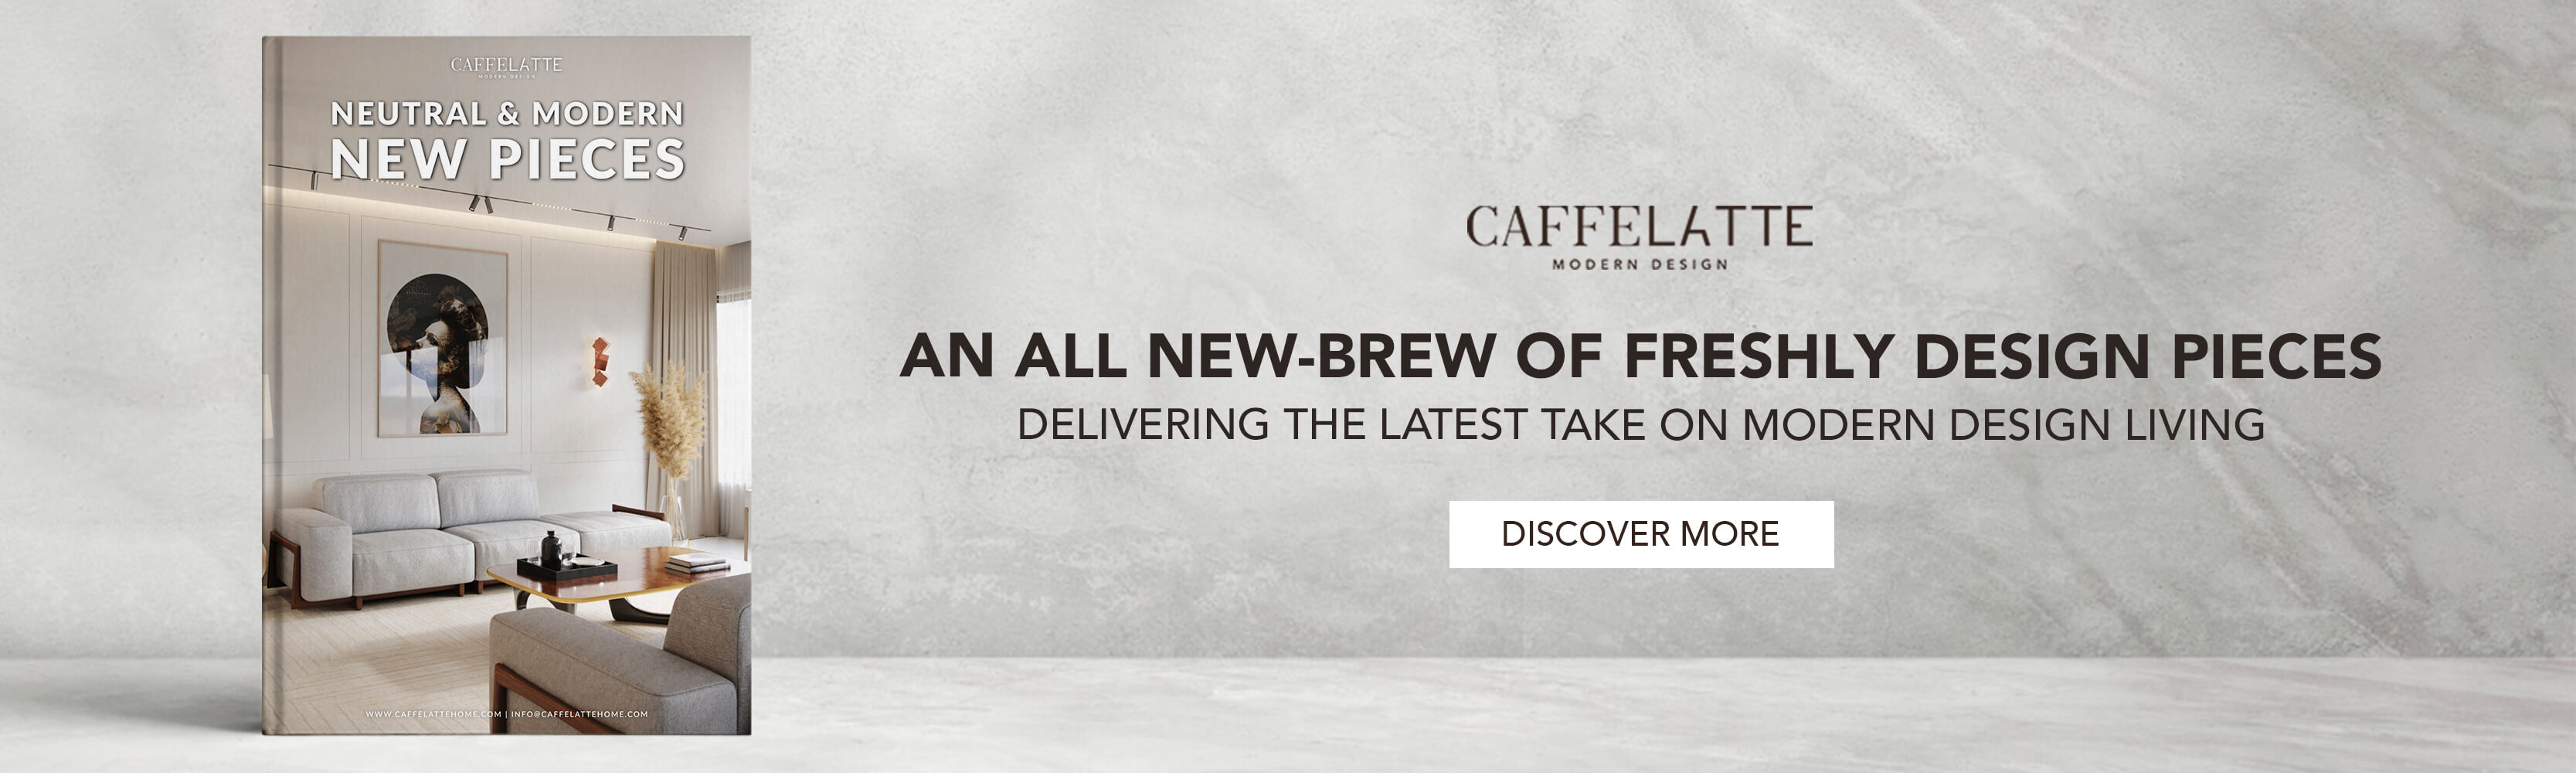 New Products Caffe Latte